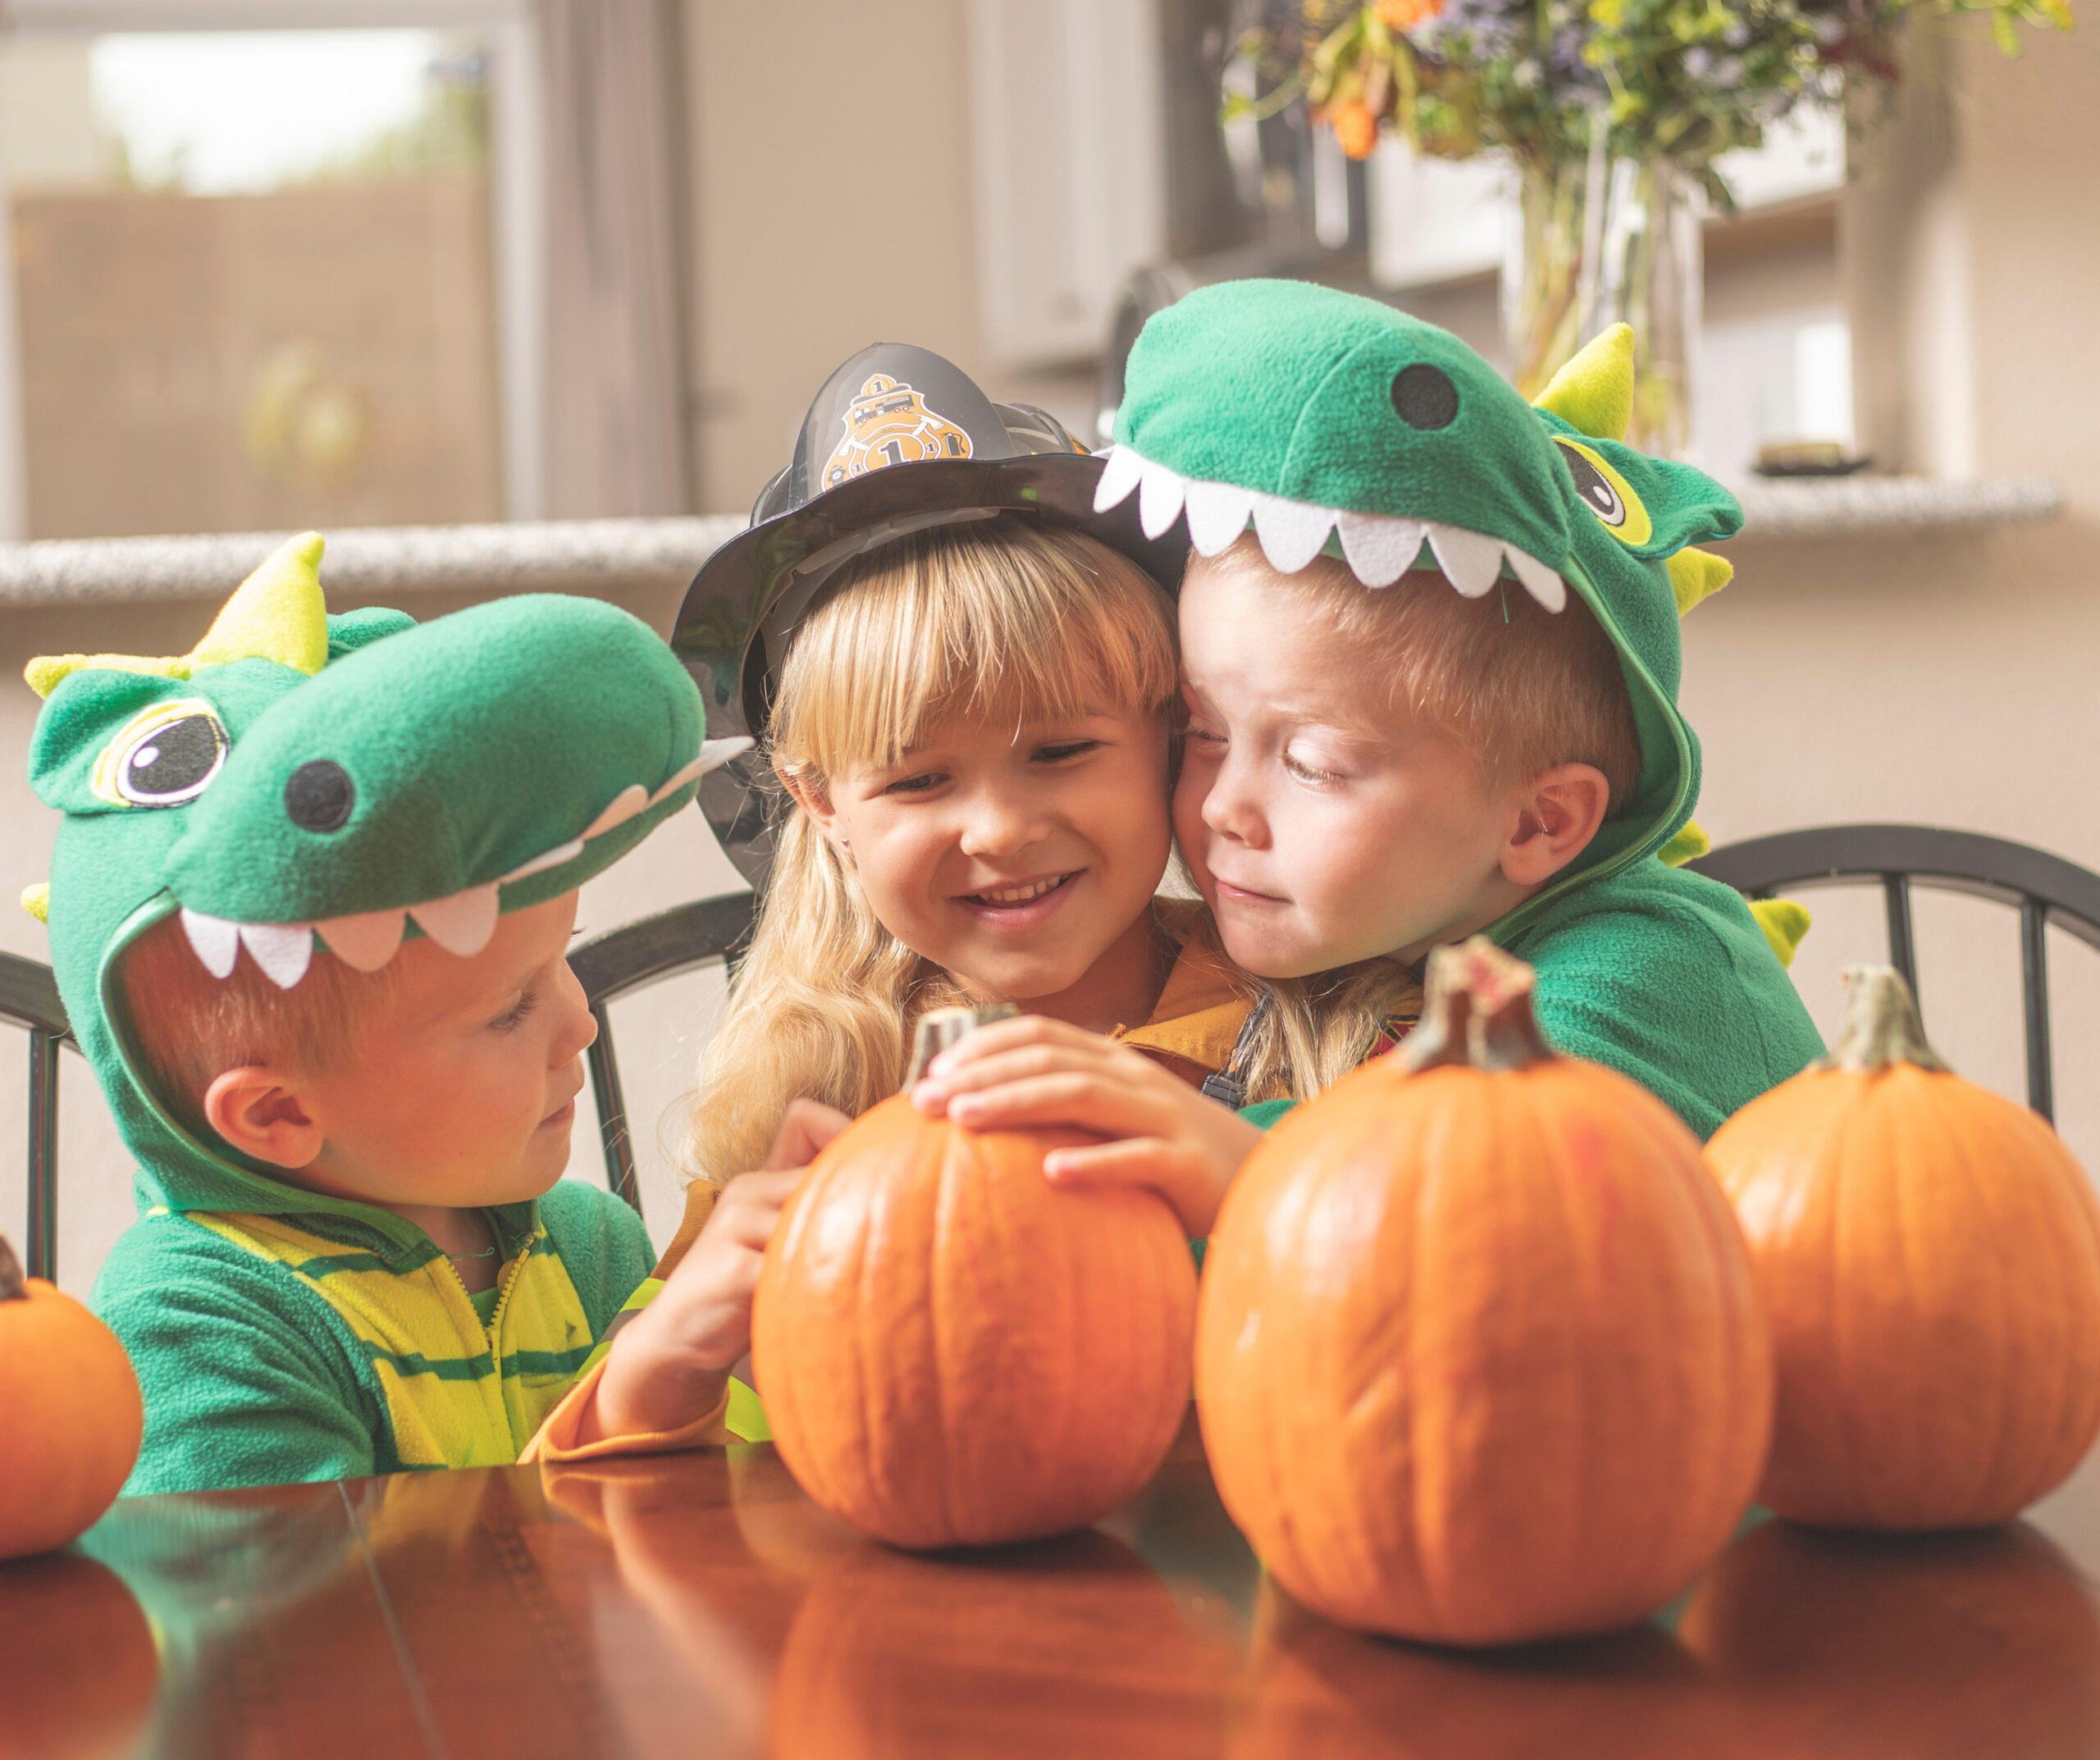 Halloween - kids in dinosaur costumes sitting at a table in the kitchen with pumpkins